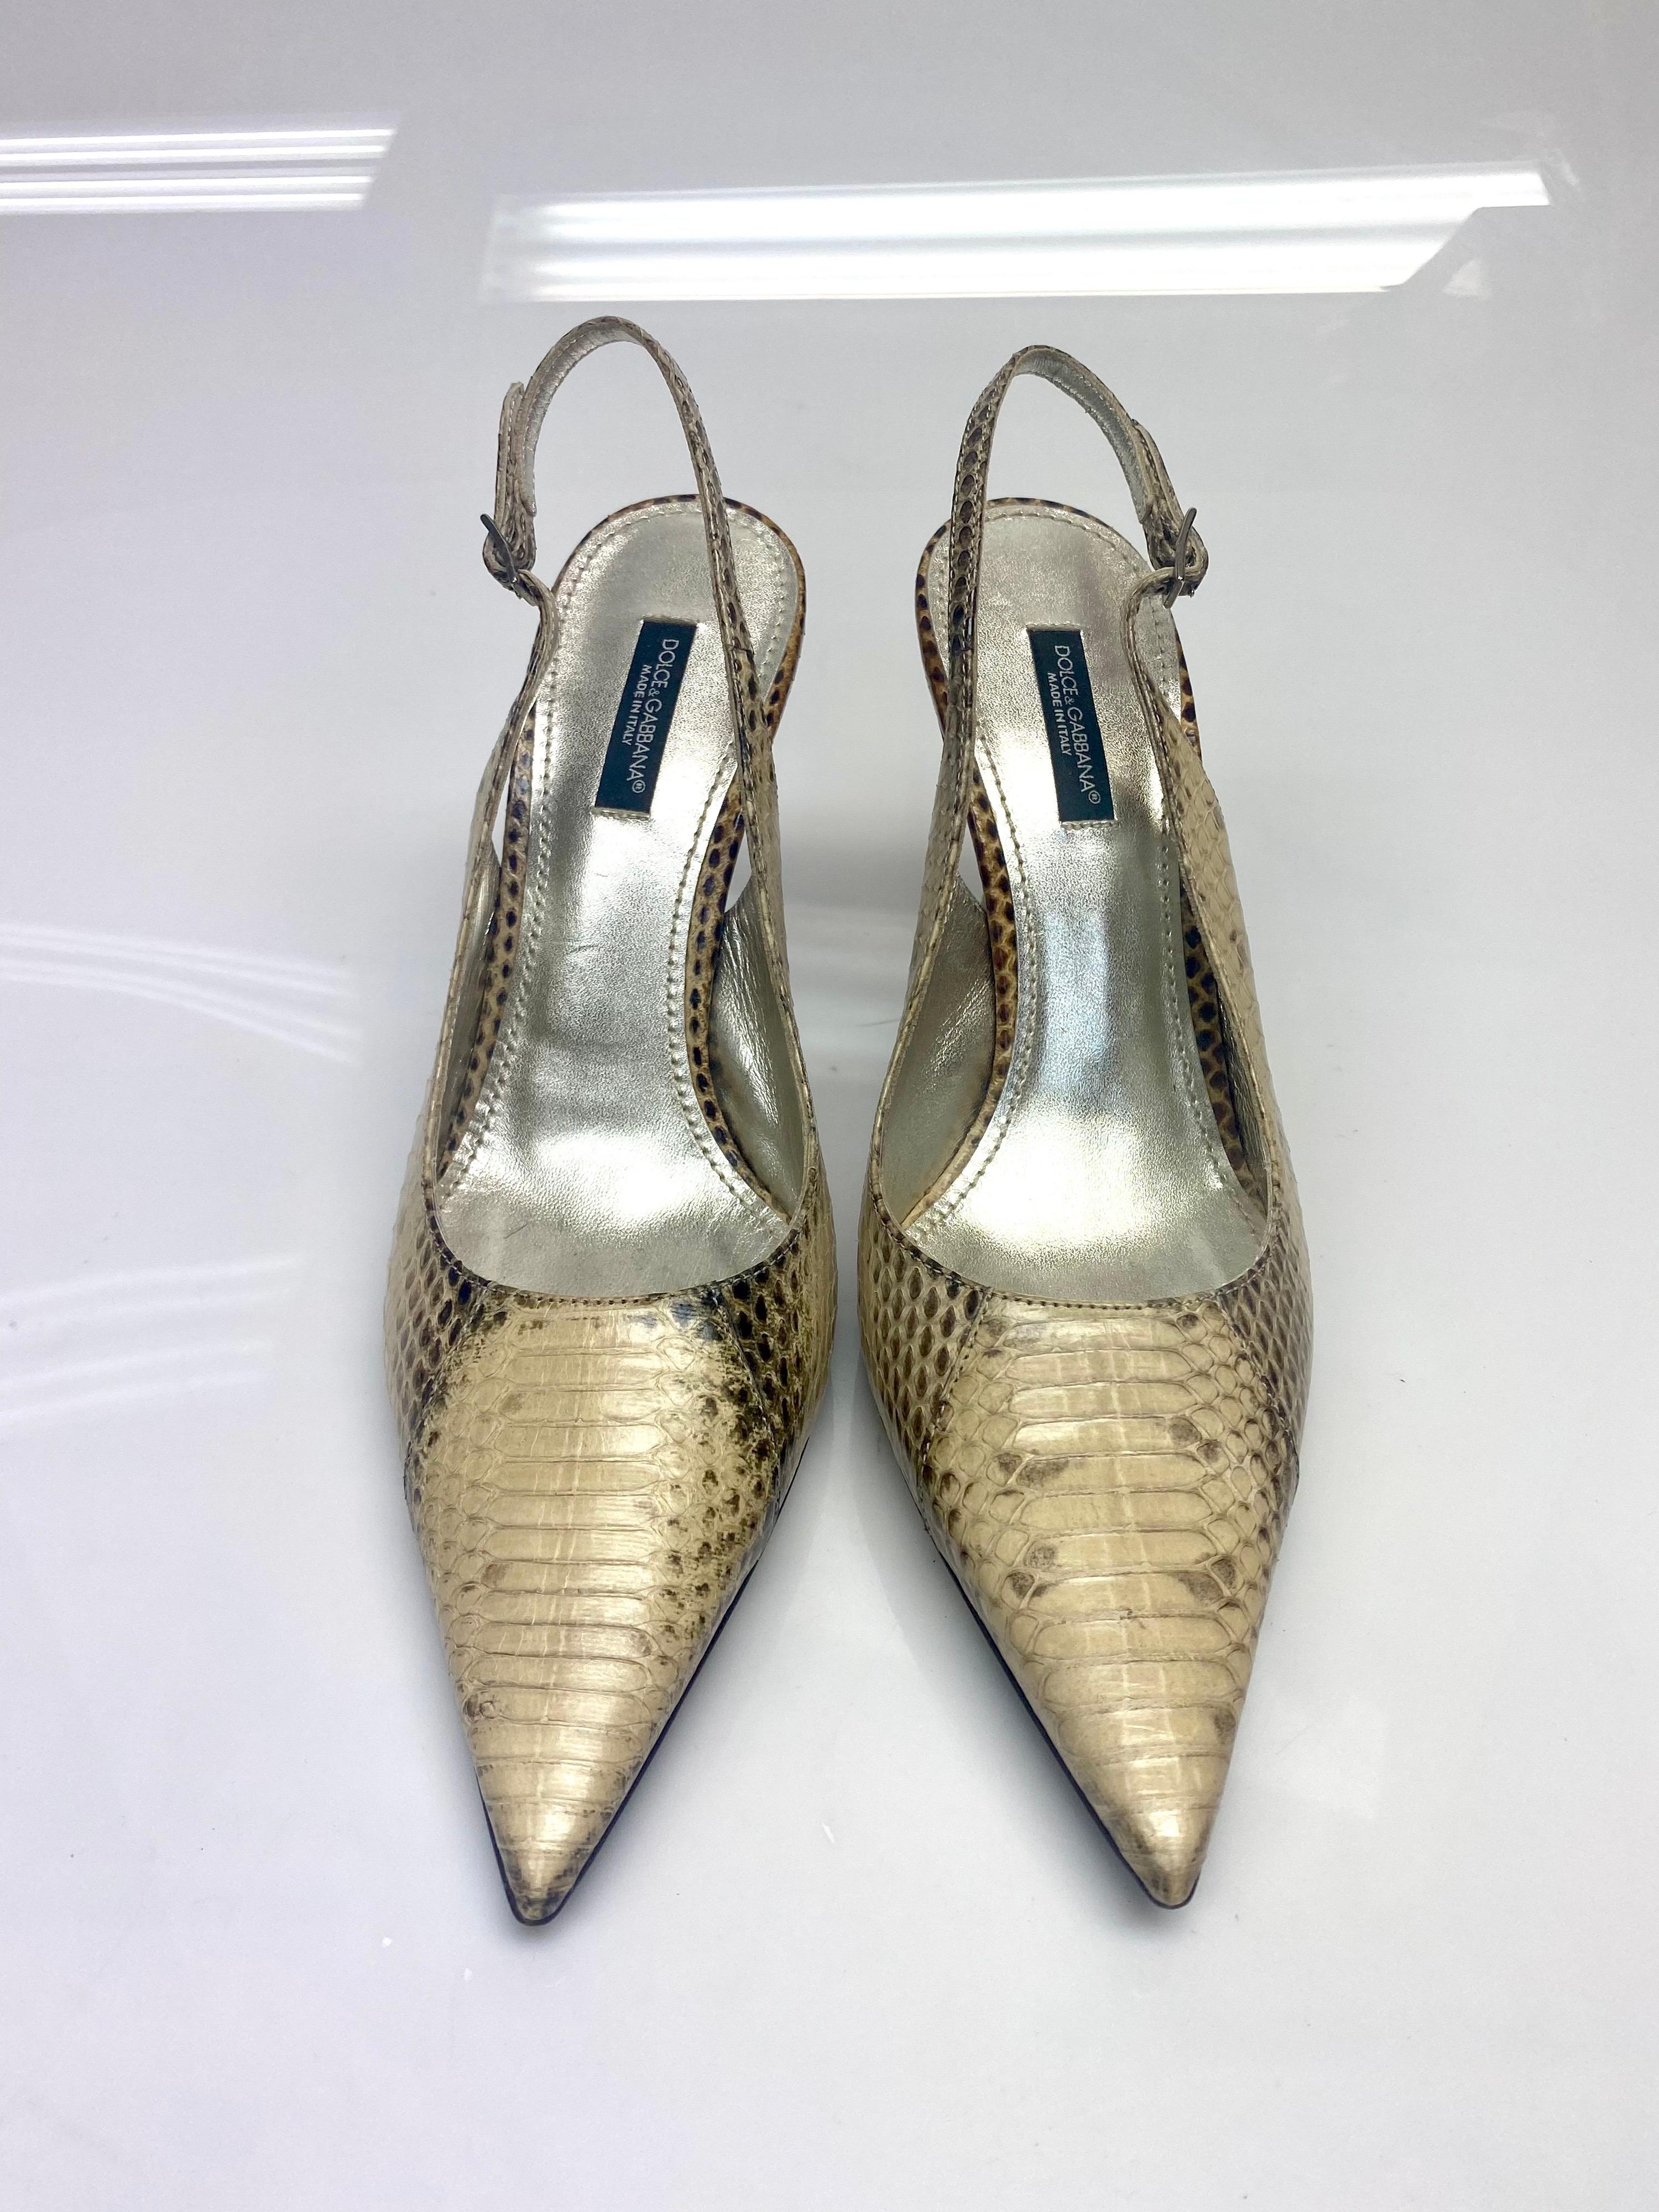 Dolce & Gabbana Beige Snake Slingback Heels Size 38 In Excellent Condition For Sale In West Palm Beach, FL